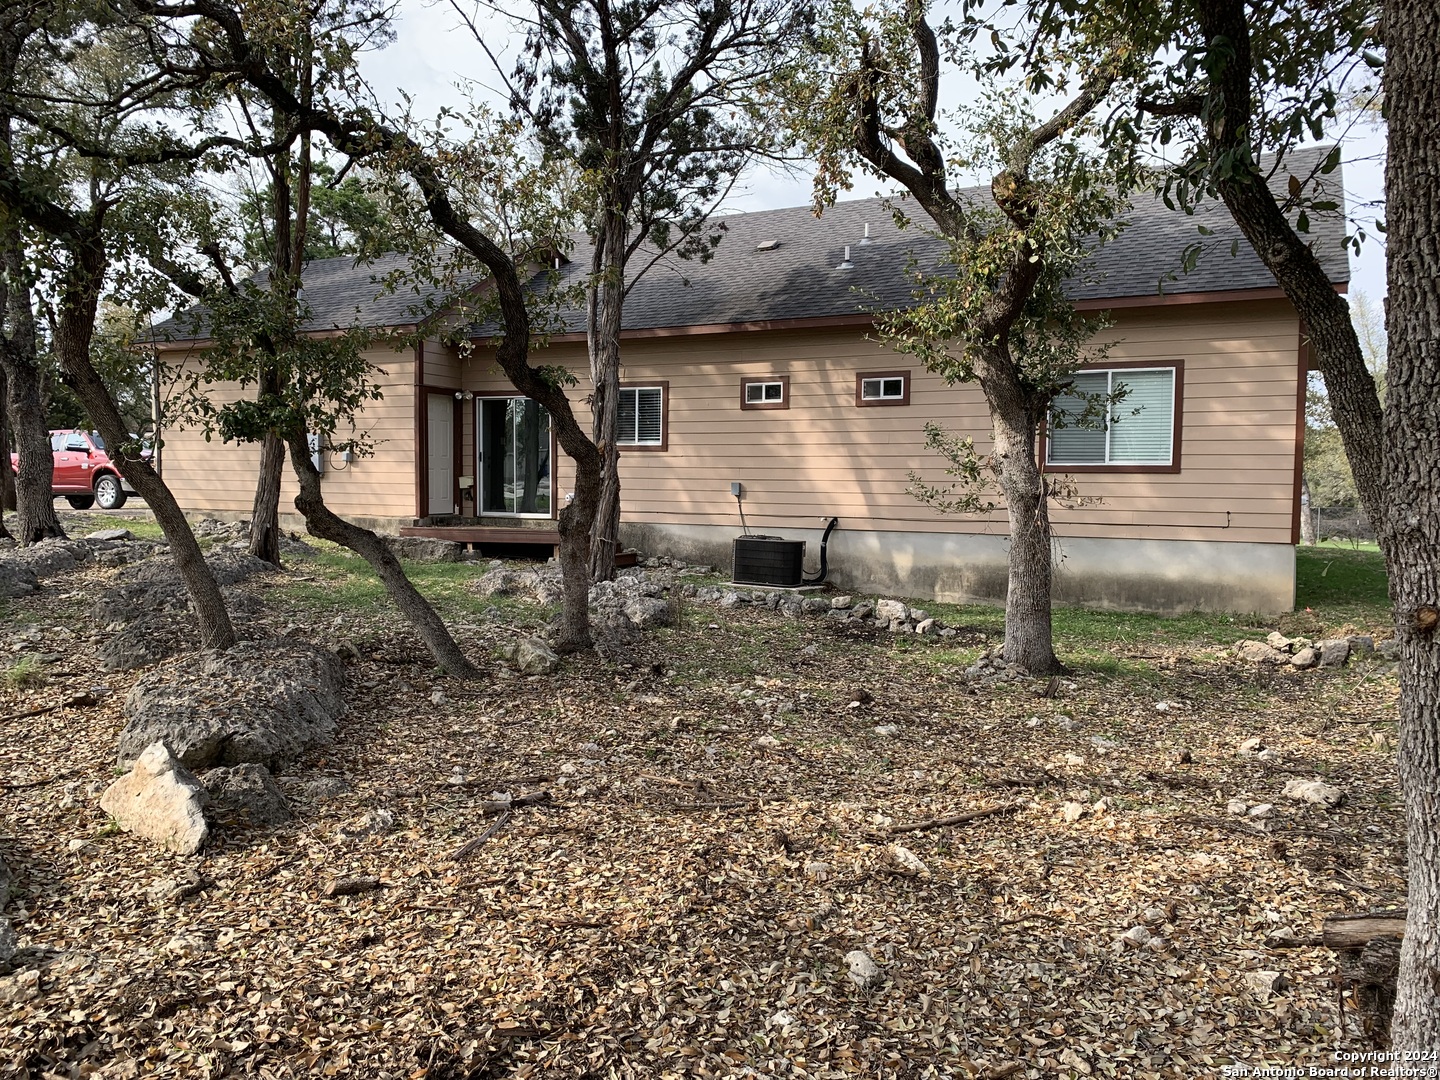 1903 TANGLEWOOD TRAIL   Spring Branch TX 78070